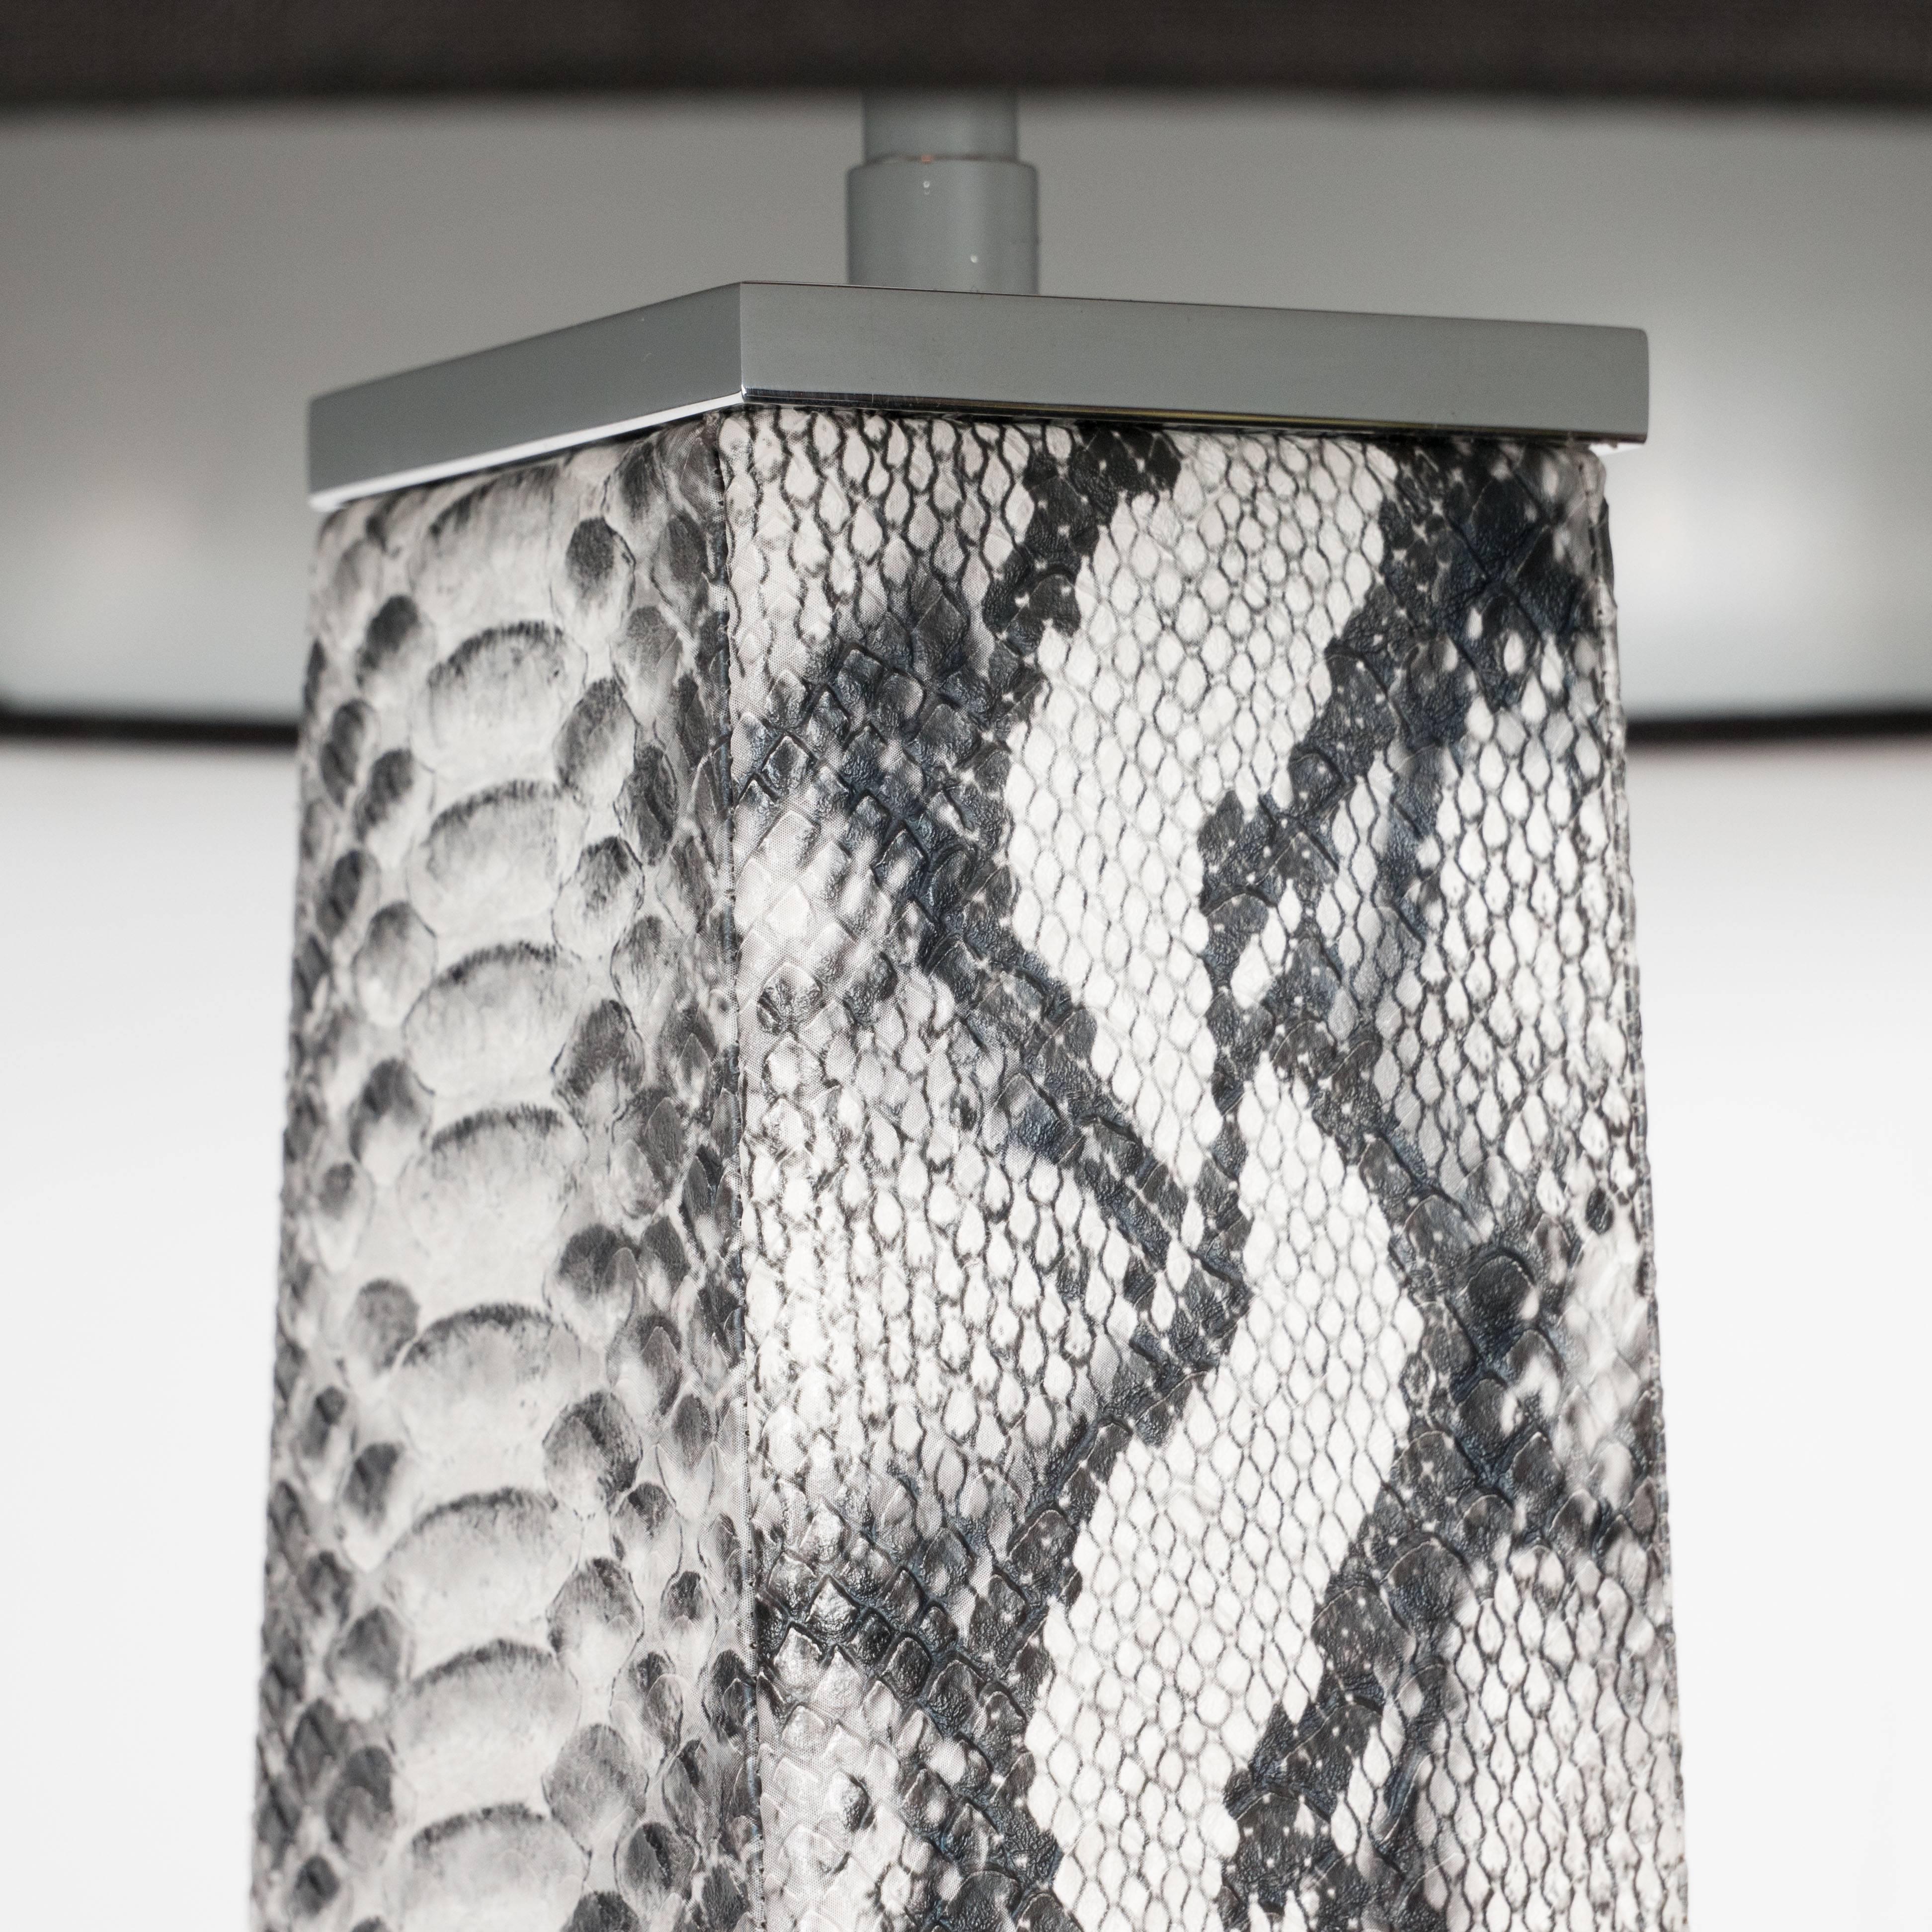 American J. M. F. Floor Lamp in Grisaille Toned Faux Python Skin by Karl Springer